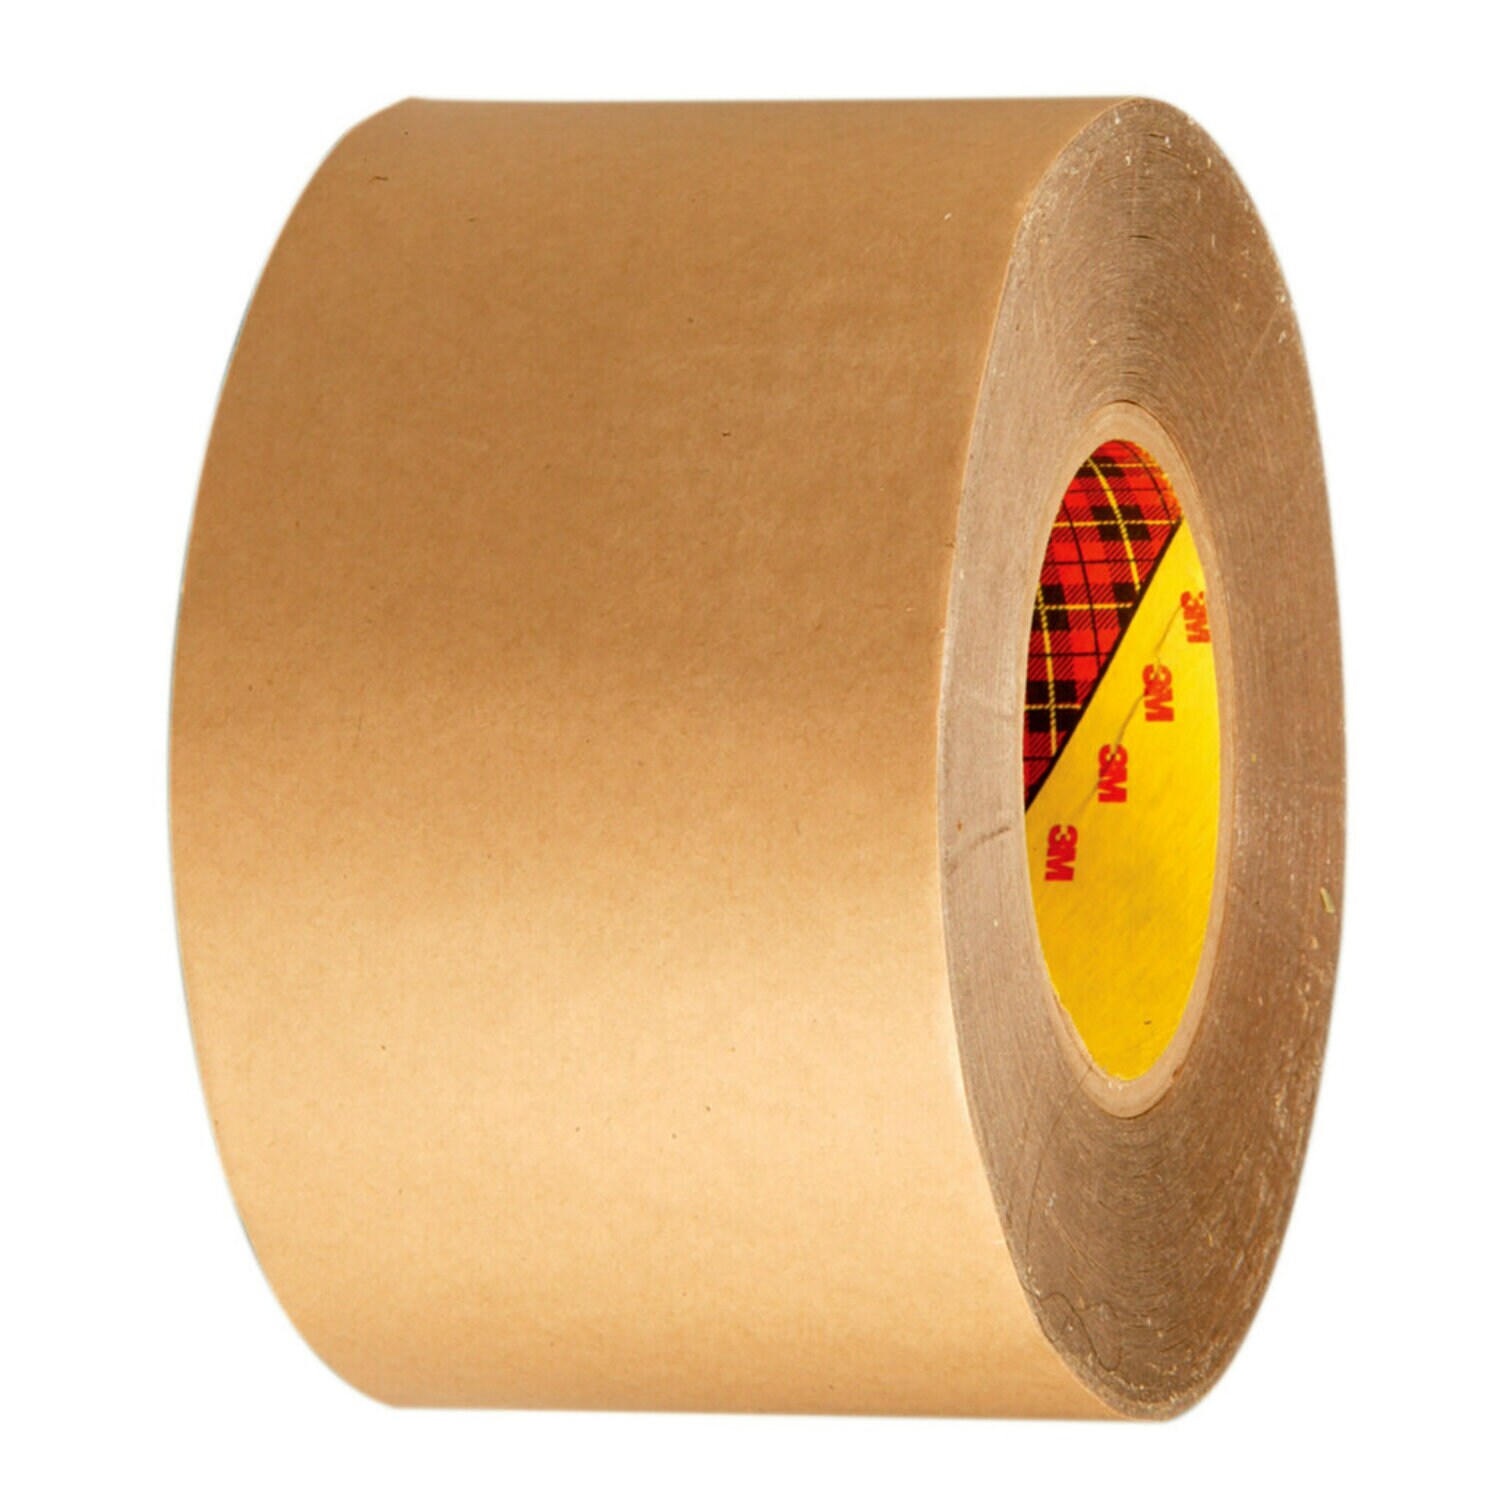 7010336177 - 3M Removable Repositionable Double Coated Tape 9425HT, Clear, 48 in x
180 yd, 5.4 mil, 1 roll per case